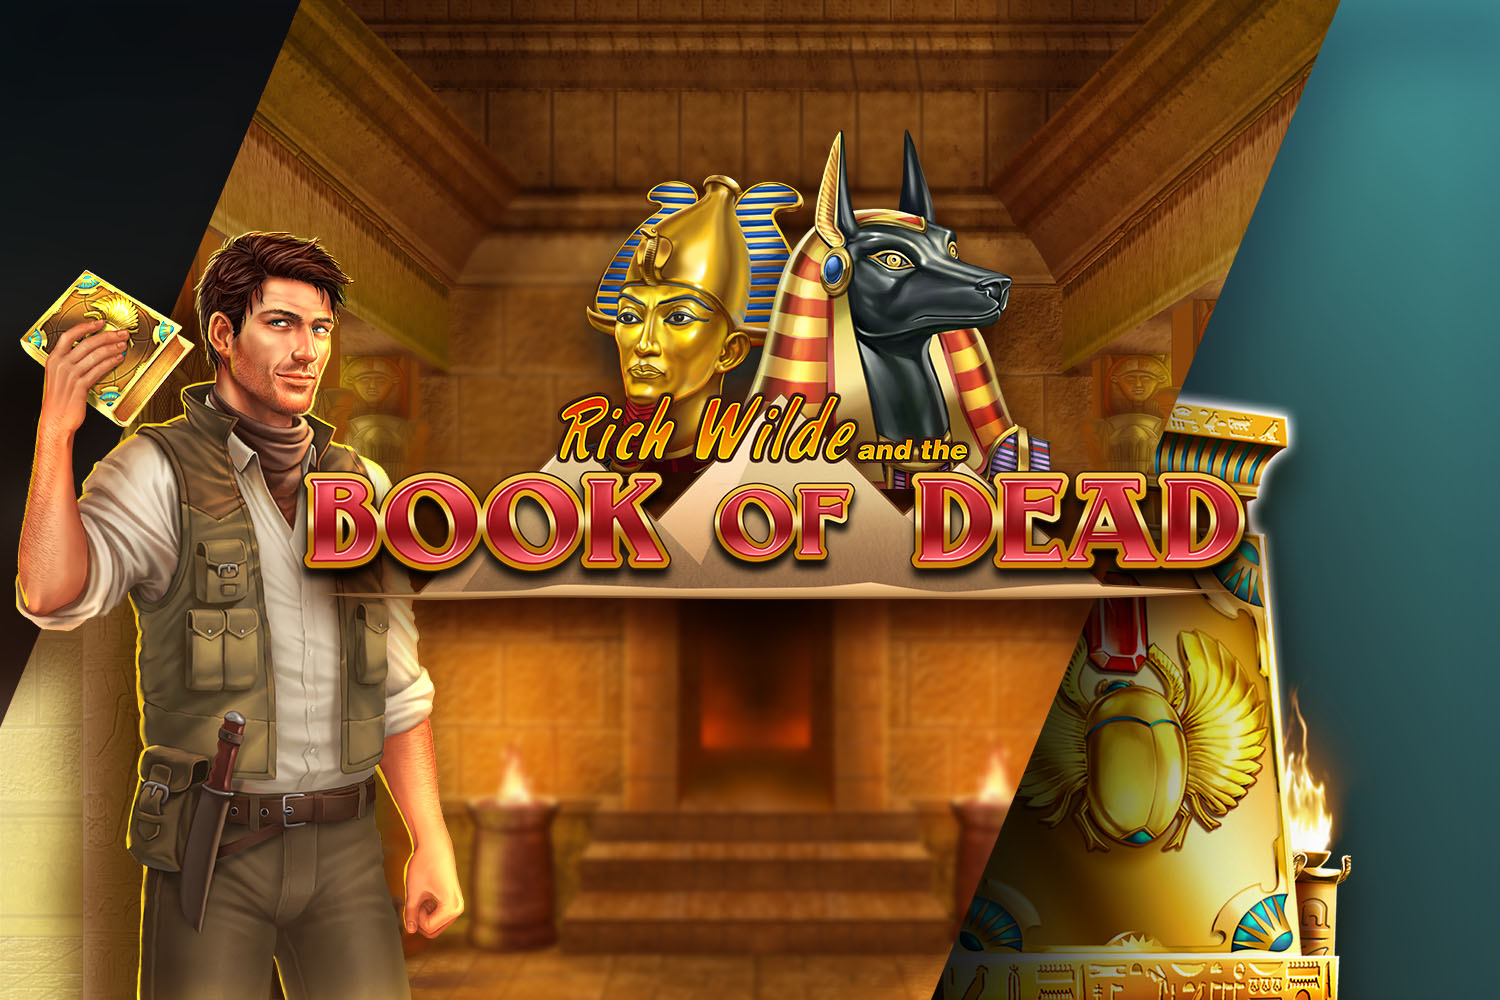 Play Book of Dead at SkyCity Online Casino